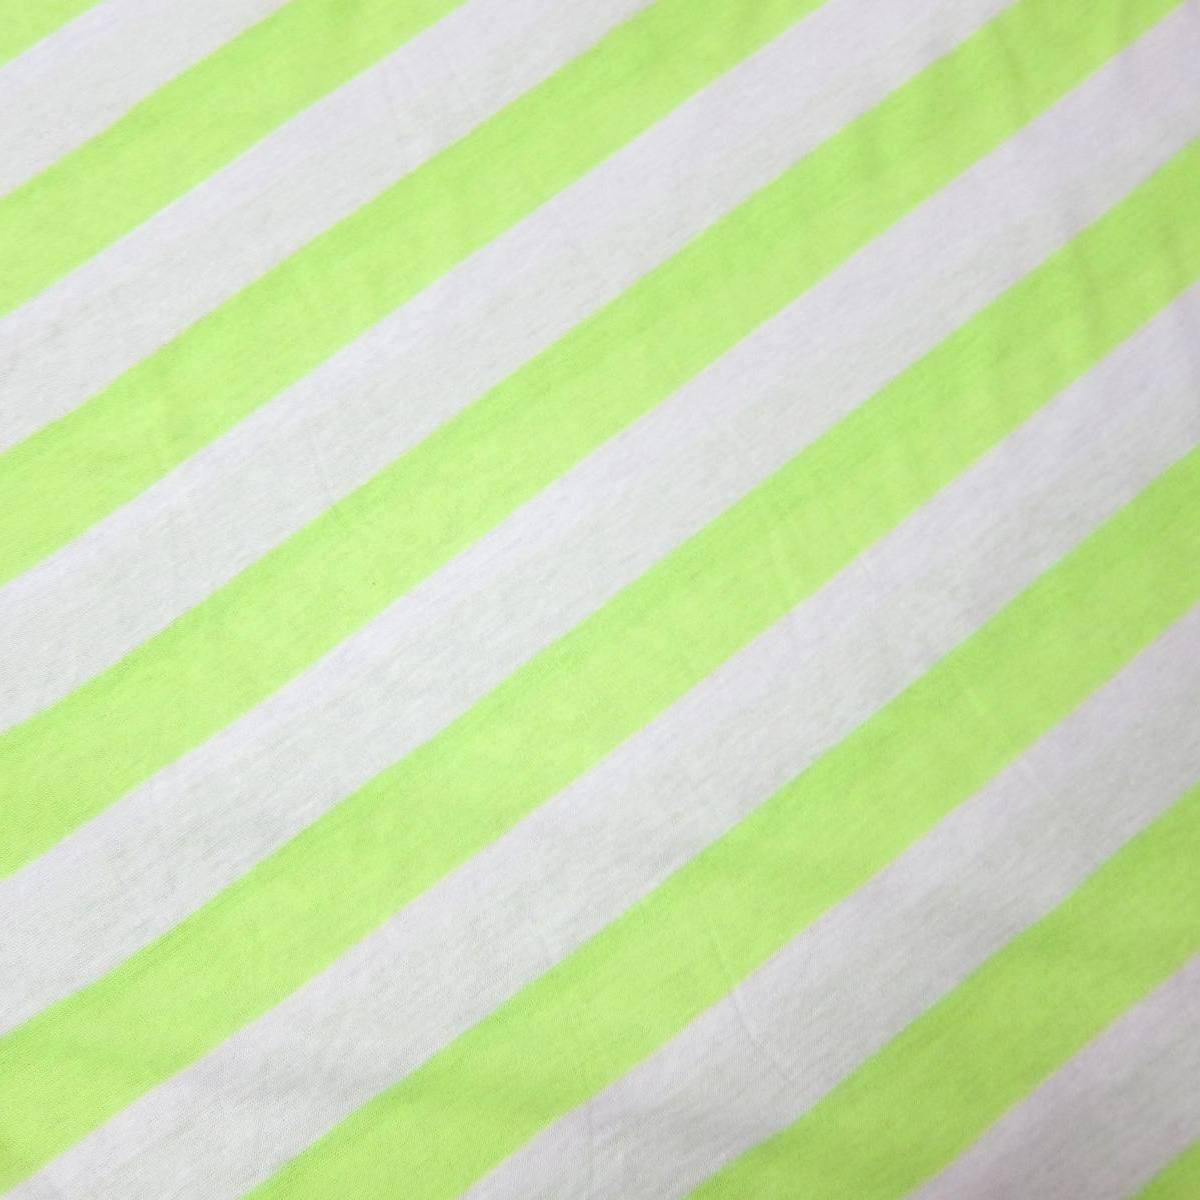 Neon Lime and White 1 1/4" Stripes on Cotton Jersey